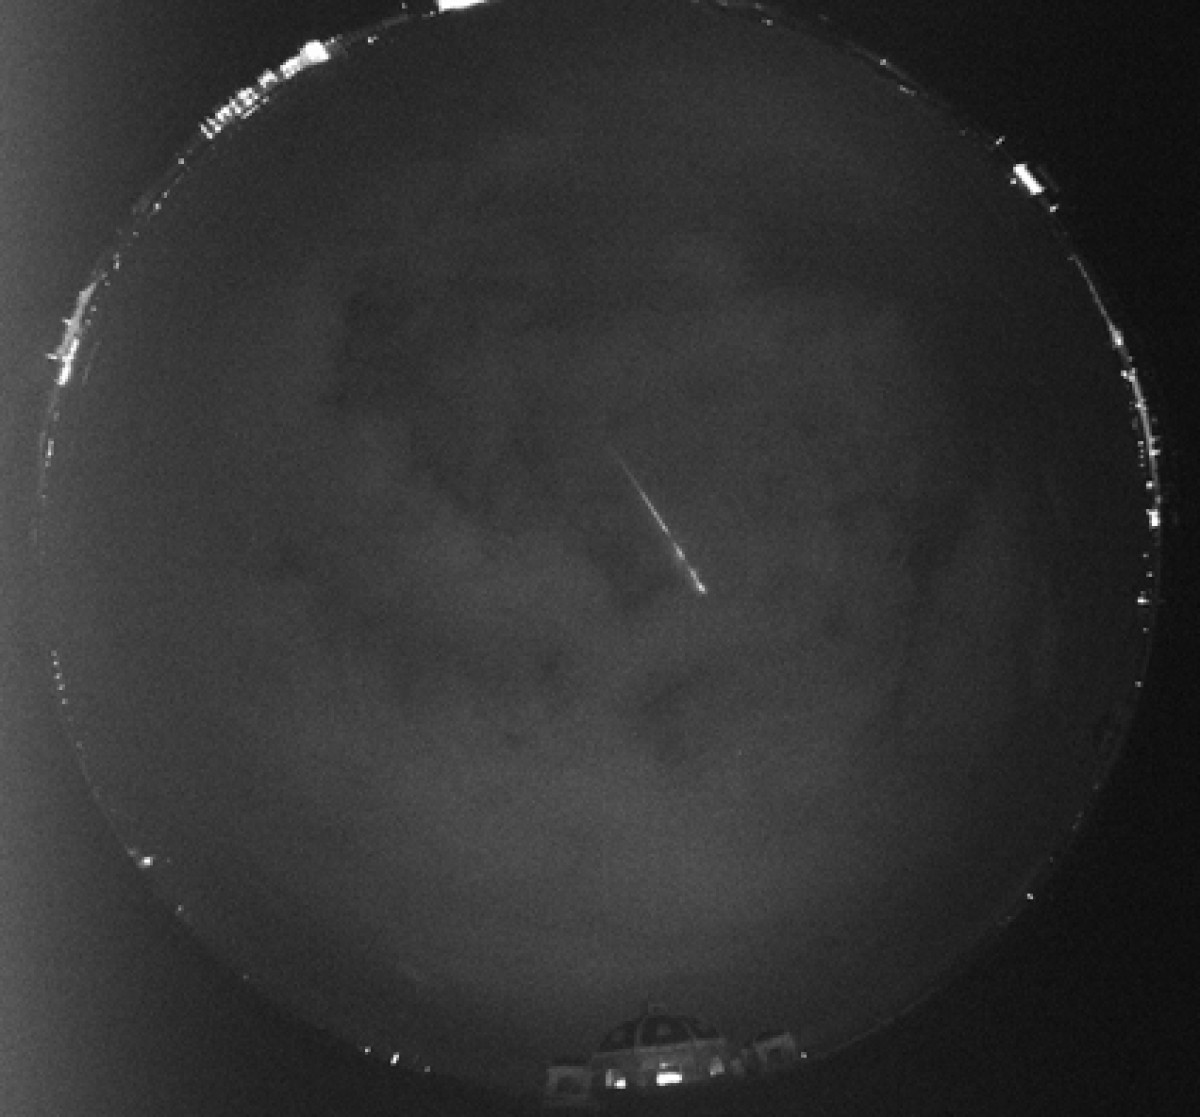 Image of a meteor taken with the camera installed on the roof of the NHM building on September 5th, 2015 at 23h 47min 51s UTC.
